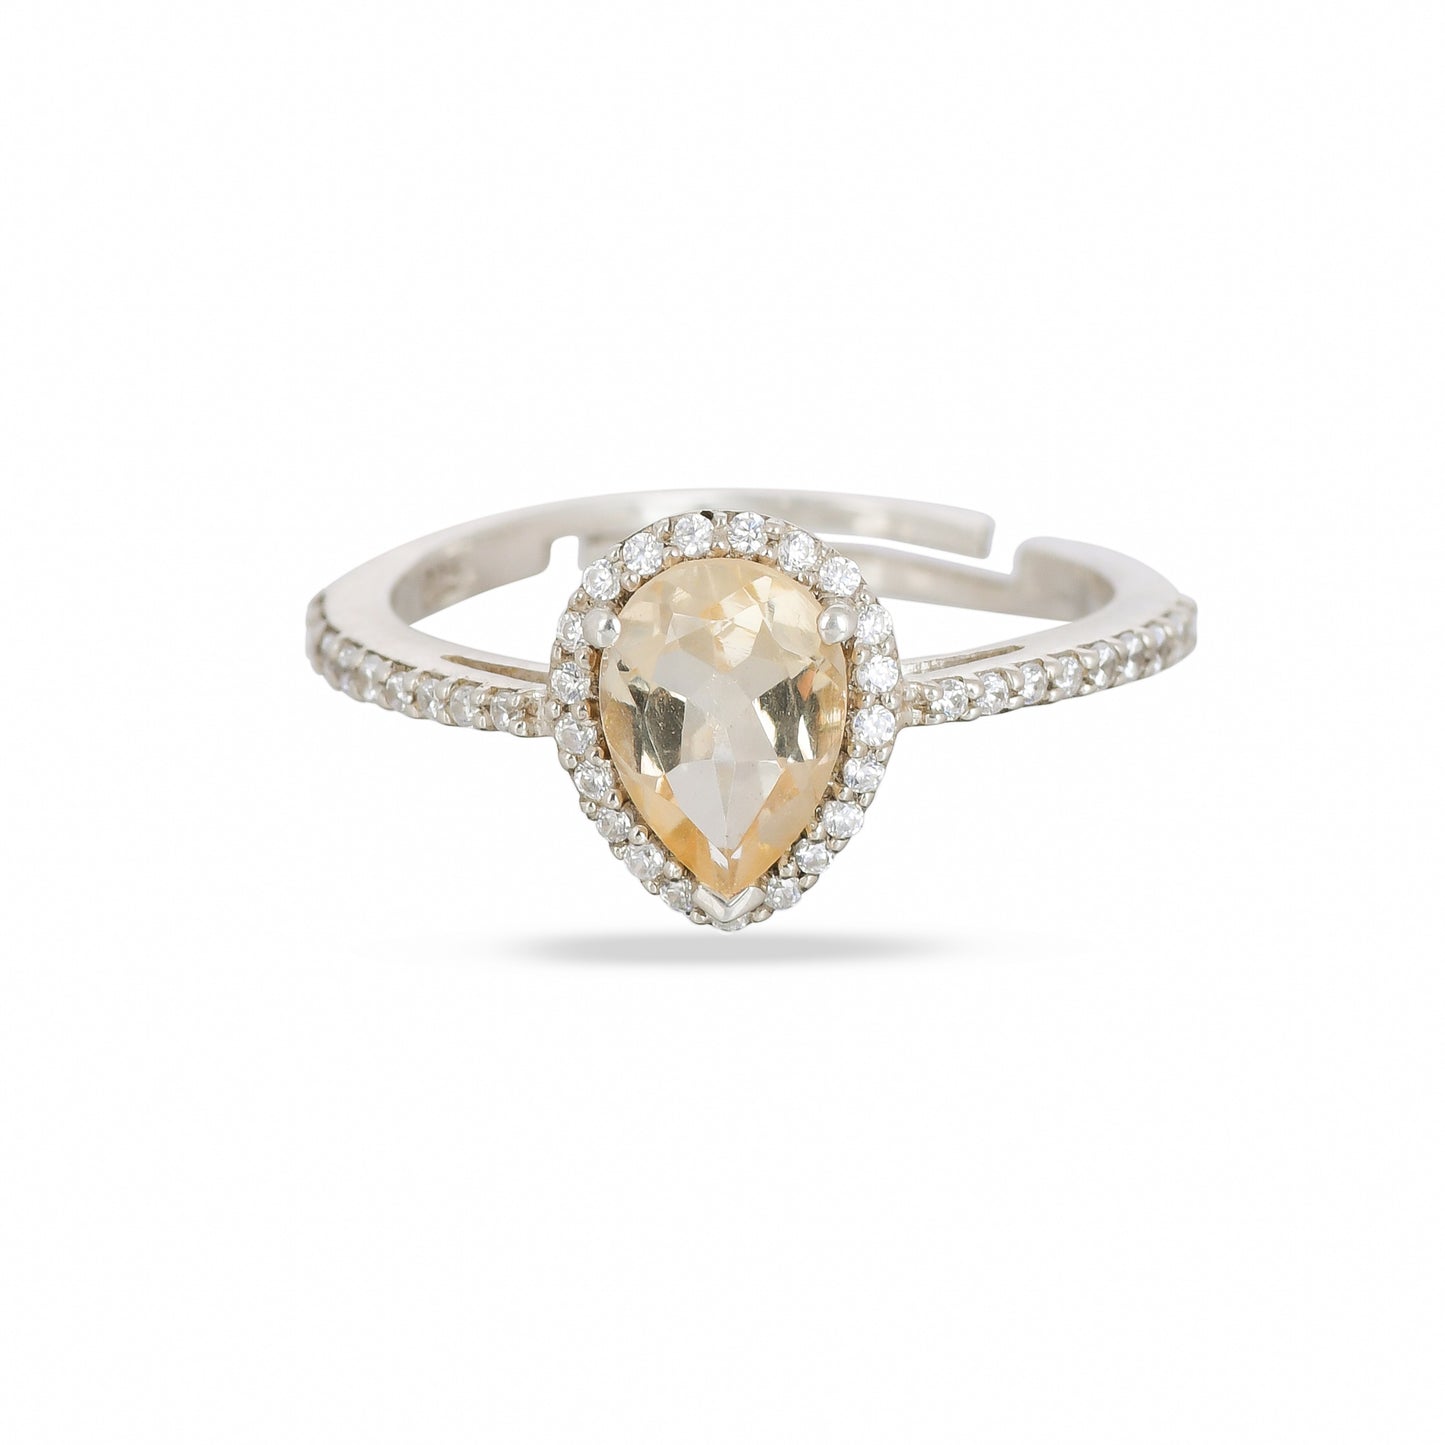 Natural Citrine Pear Gemstone Ring - From Purl Purl